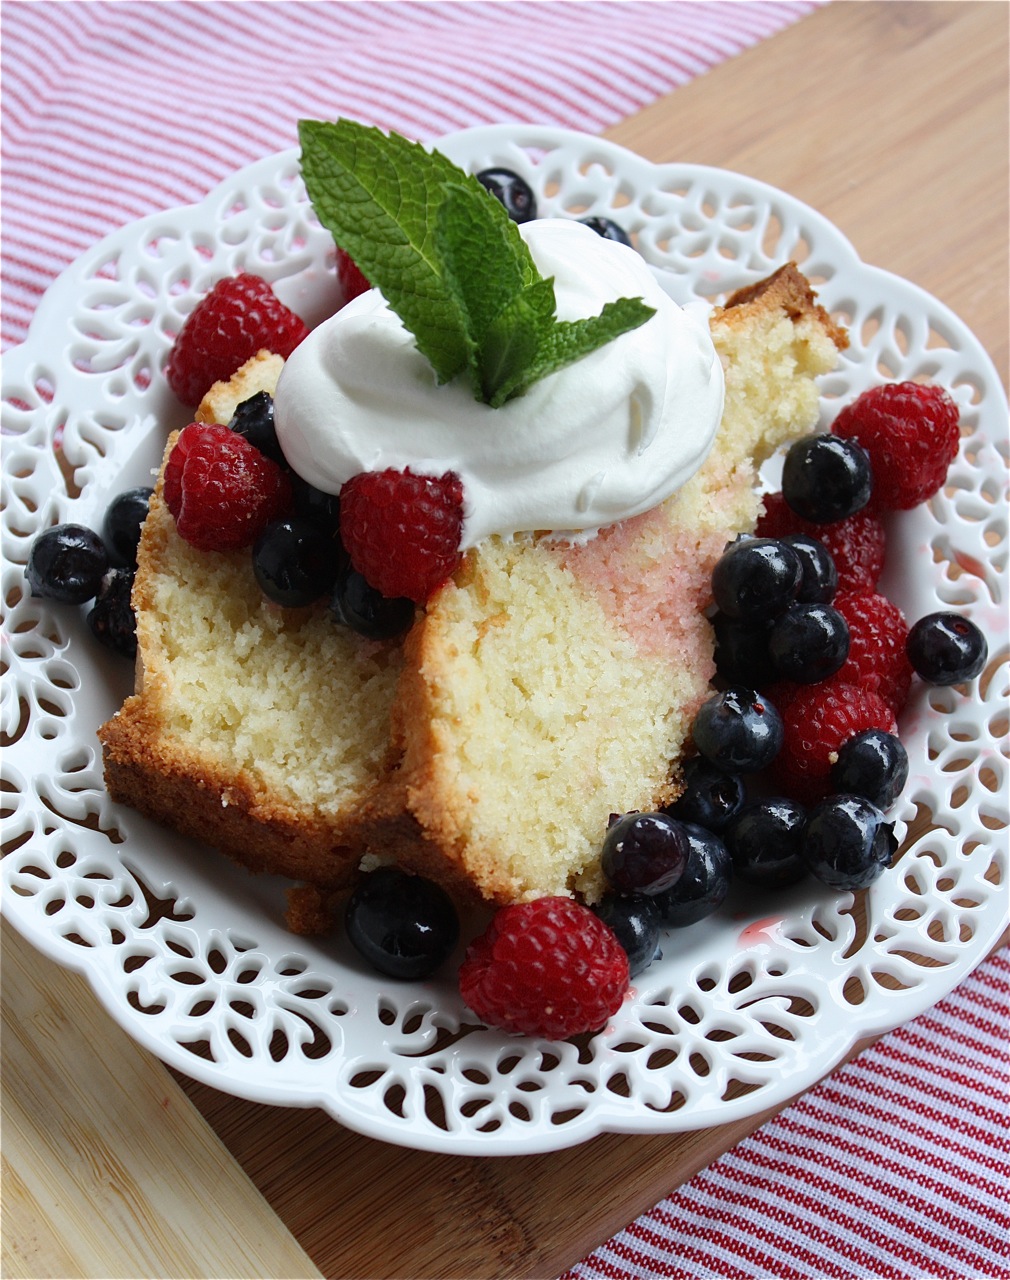 Dorie Greenspan’s Perfection Pound Cake Topped with Summer Berries